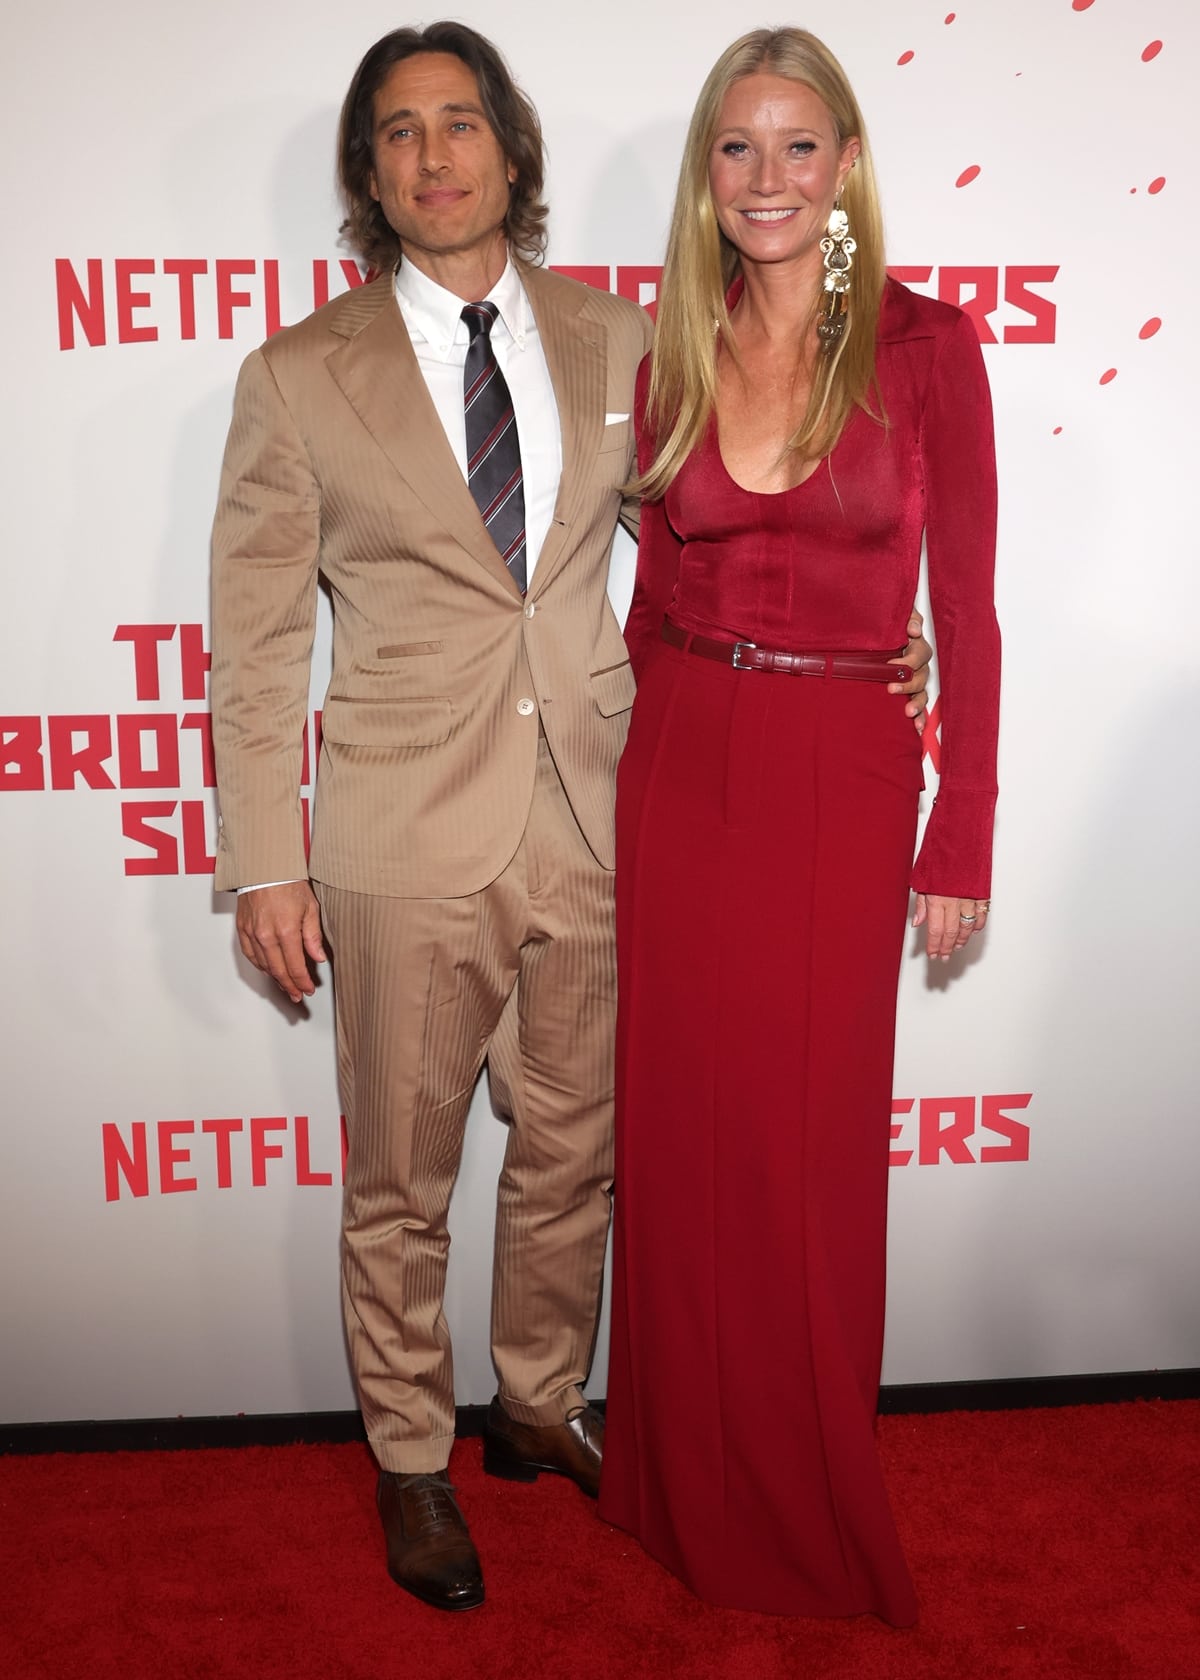 Gwyneth Paltrow and Brad Falchuk, a dazzling couple, grace the red carpet at the Netflix Tudum Theater in Los Angeles for the premiere of "The Brothers Sun" on January 4, 2024